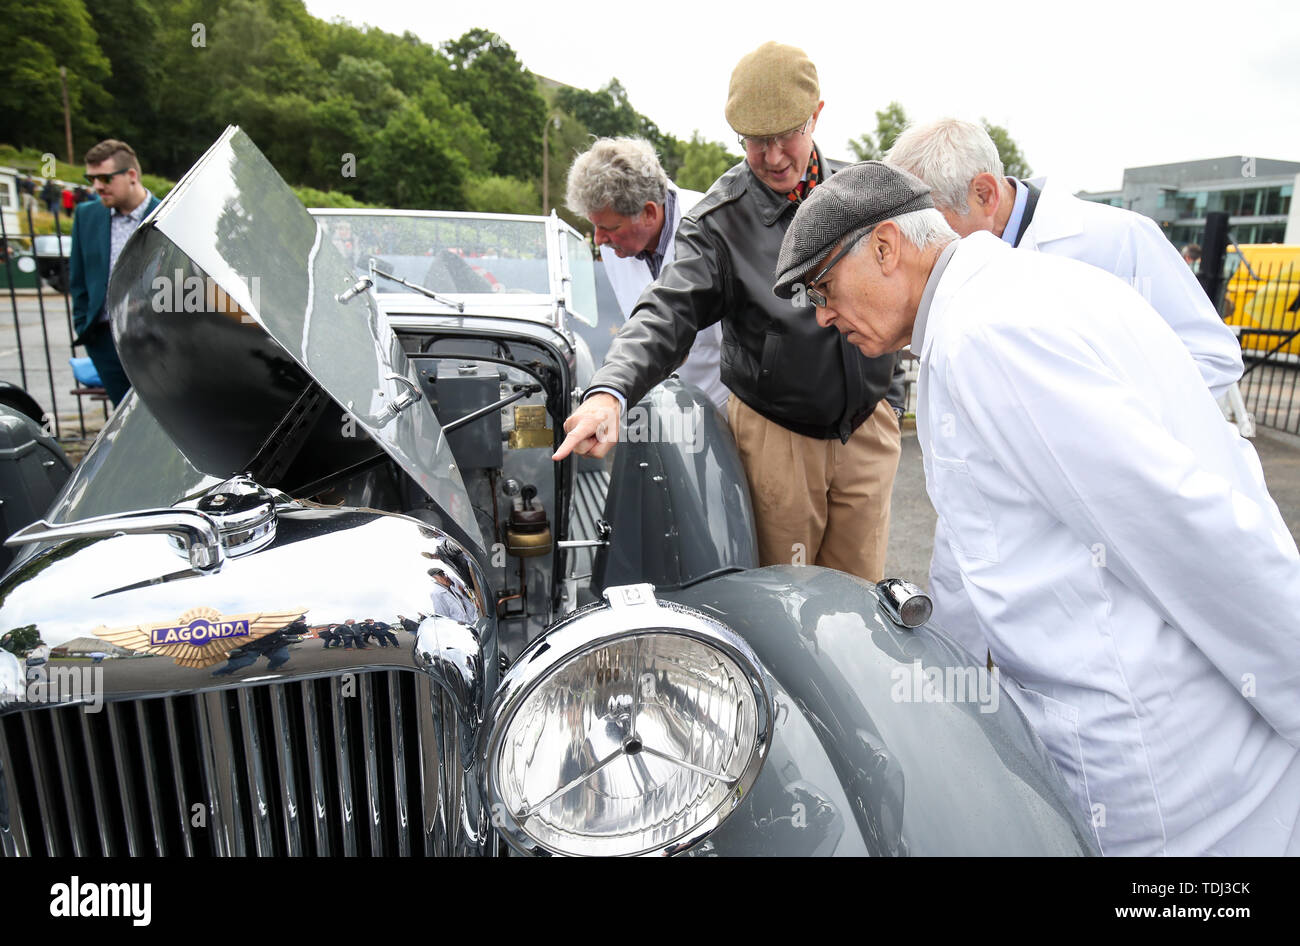 Judges from the VSCC (Vintage sports Car Club) inspect a 1937 Lagonda LG 45, for the traditional concours d'elegance, during the Brooklands Double Twelve Motorsport Festival at Brooklands Museum, in Weybridge, Surrey. Stock Photo